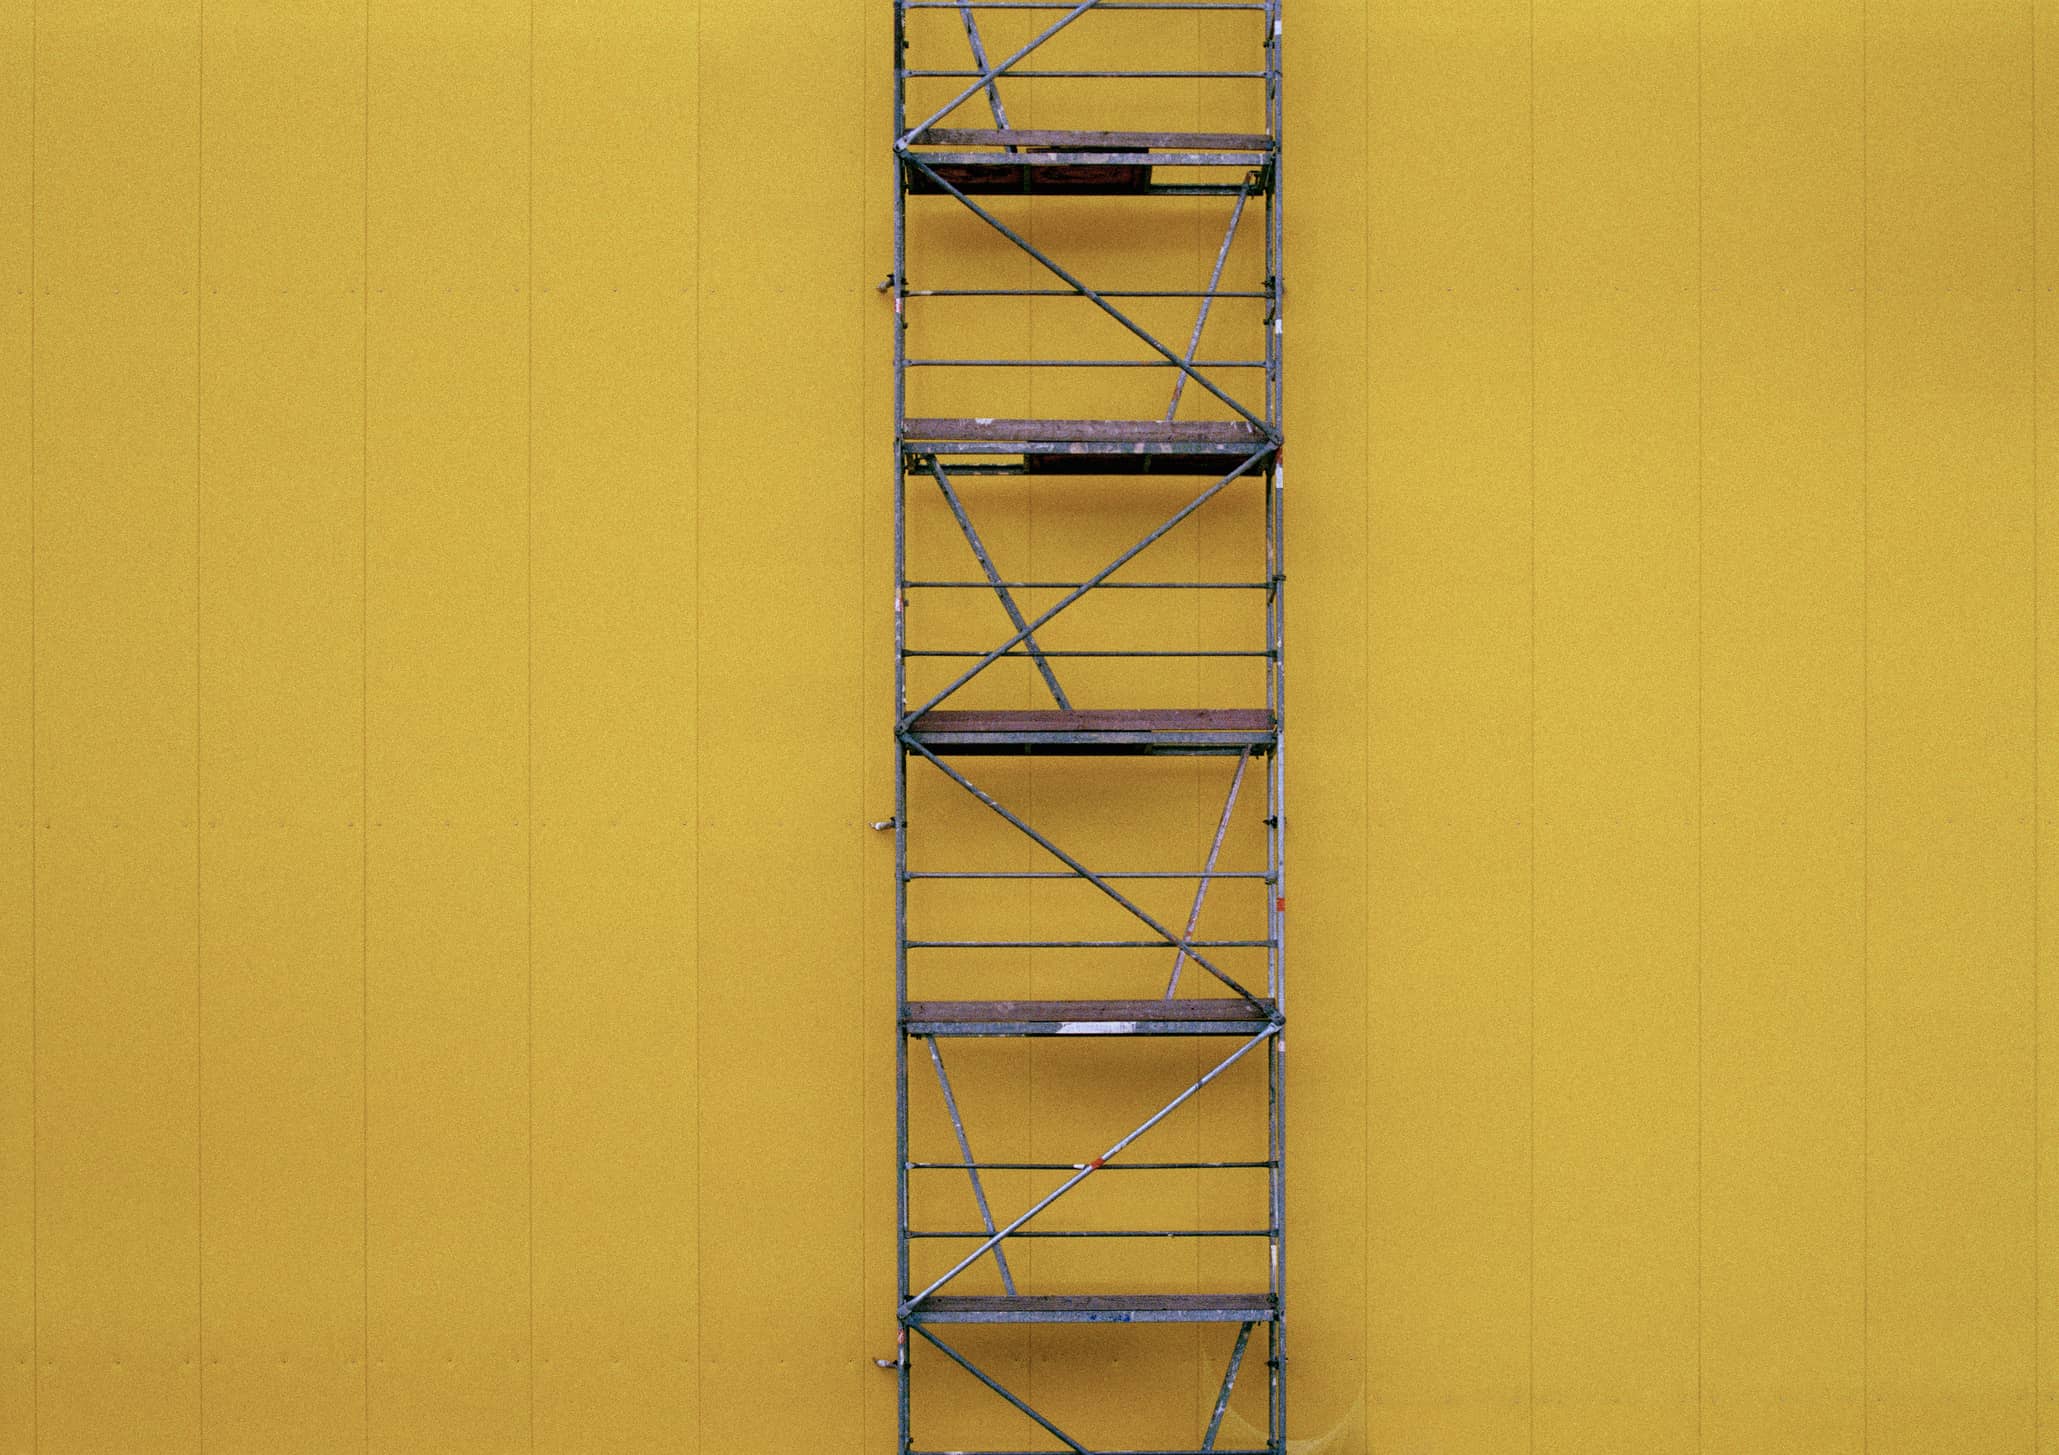 Scaffolding against a yellow wall